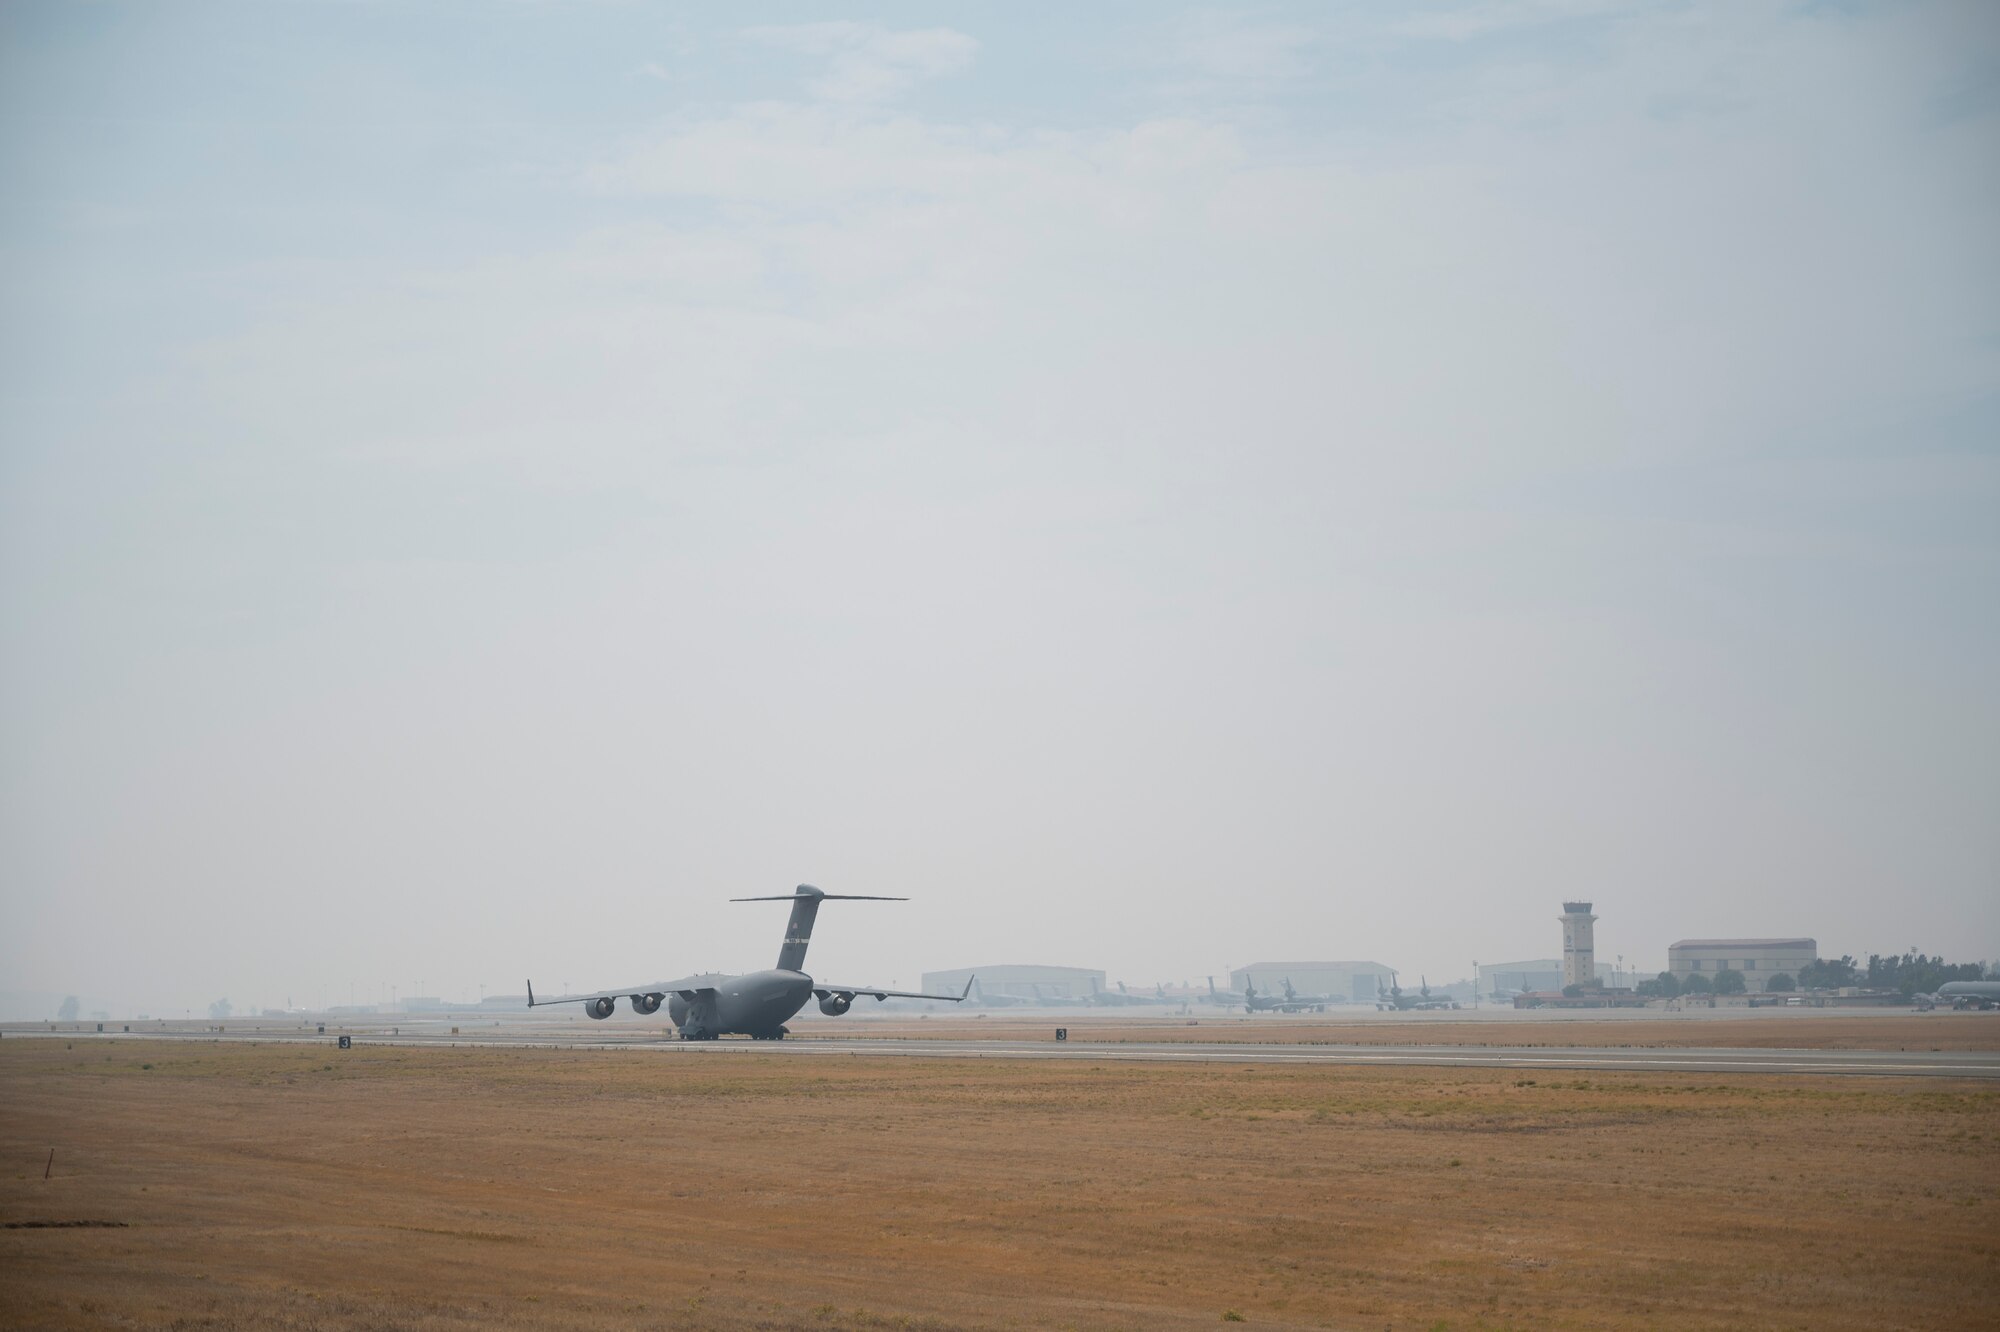 A C-17 Globemaster III assigned to the 21st Airlift Squadron, taxis on a runway at Travis Air Force Base, California.